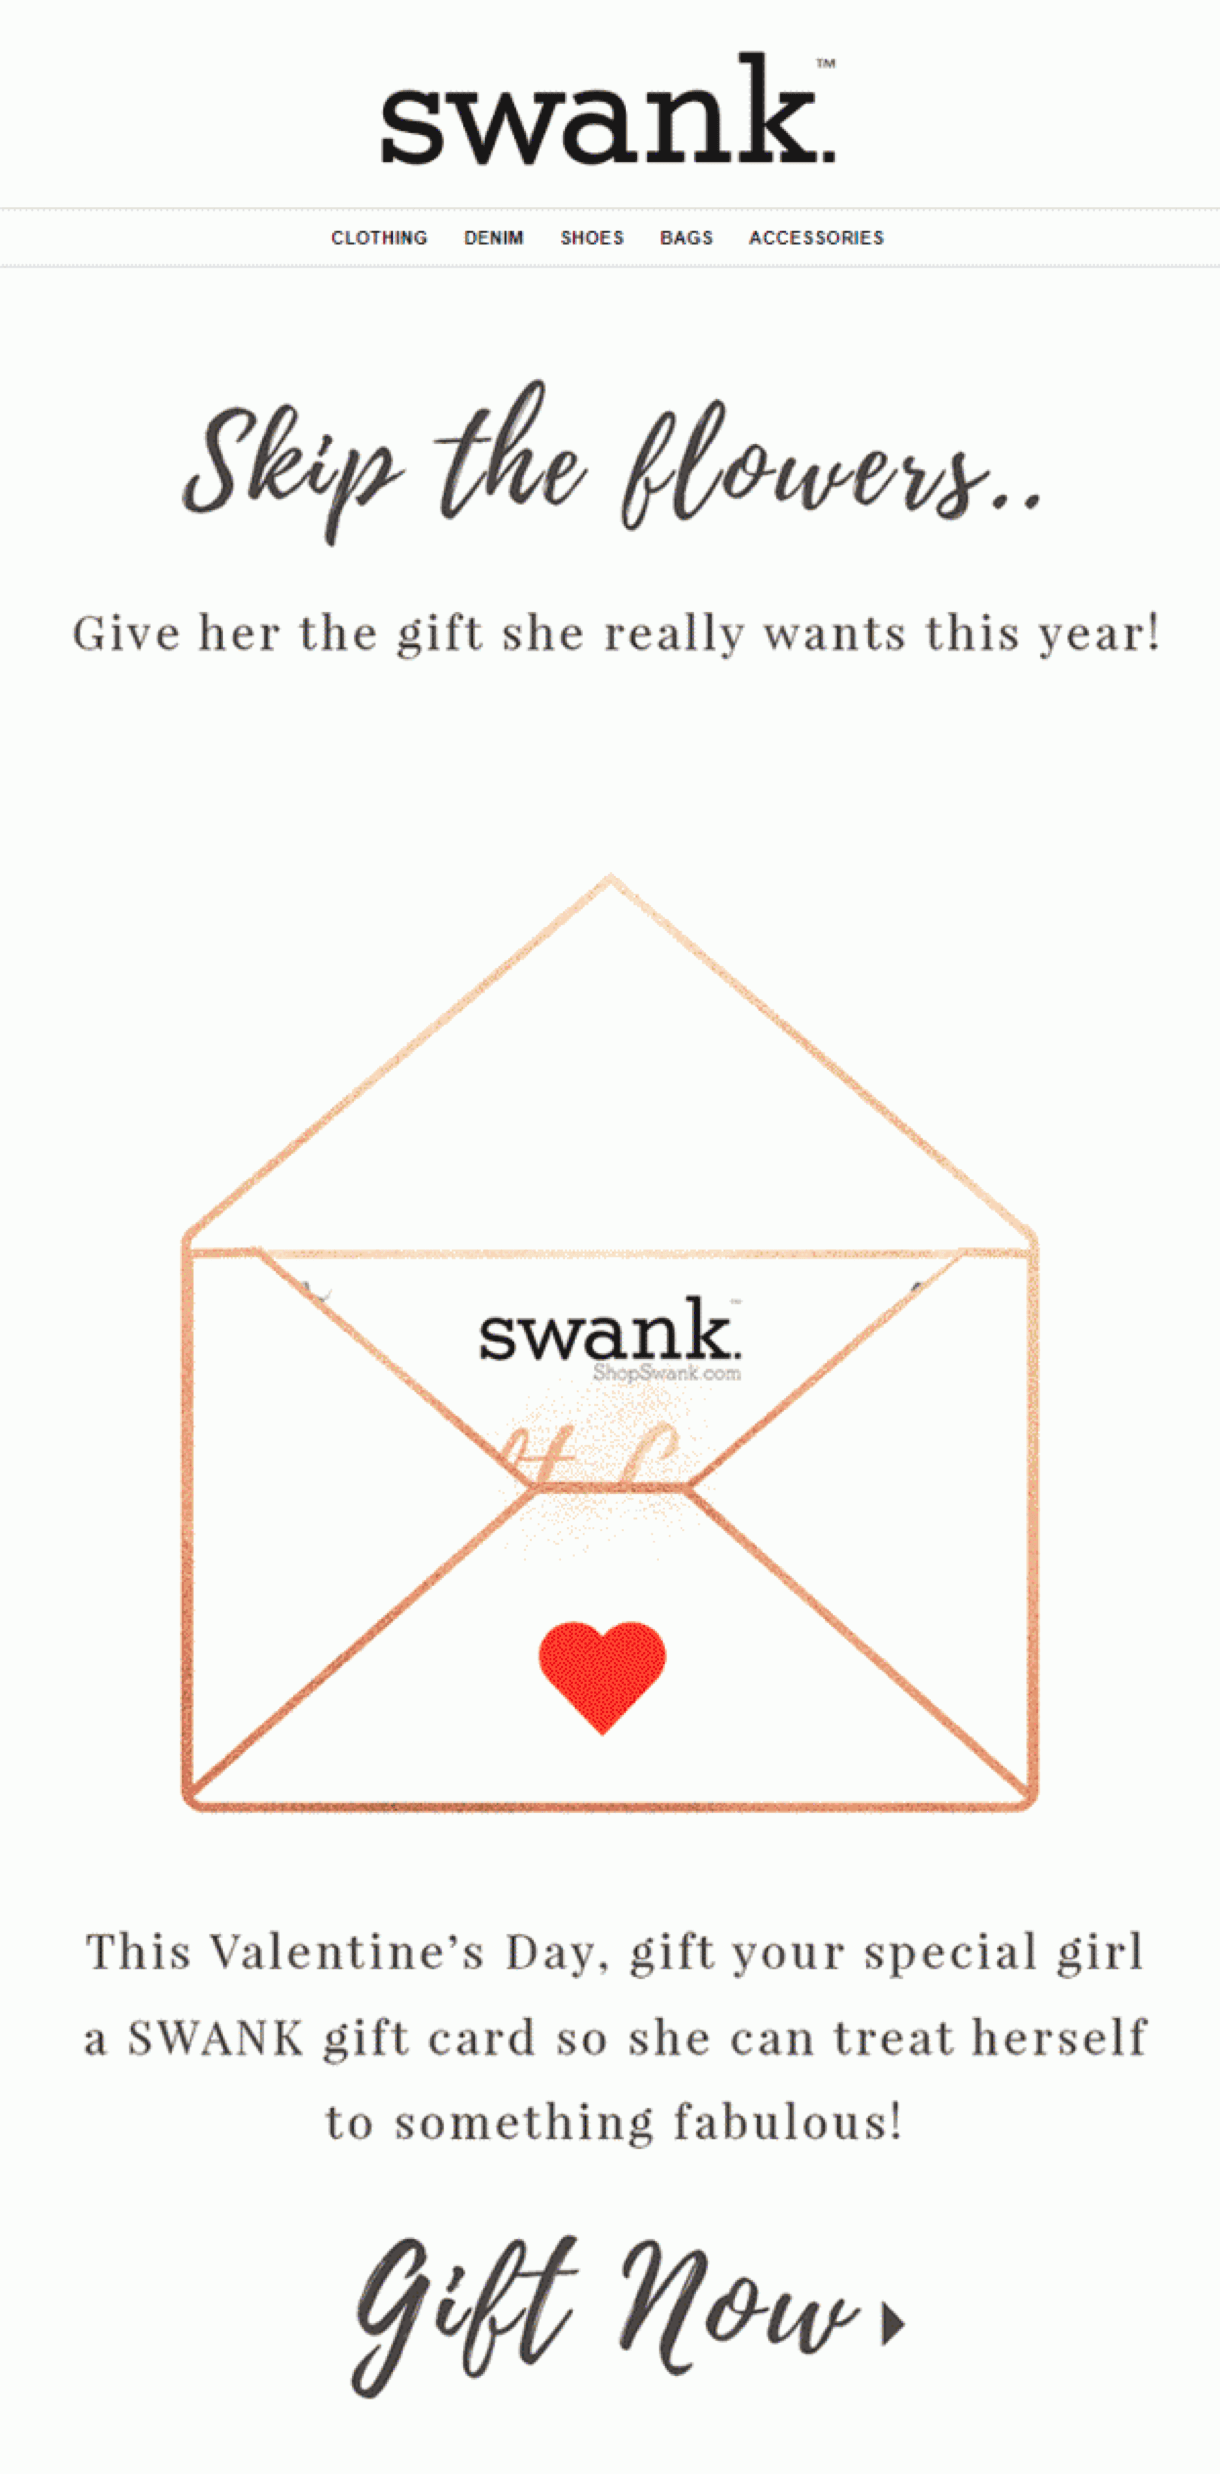 Valentine’s Day email marketing campaign by Swank